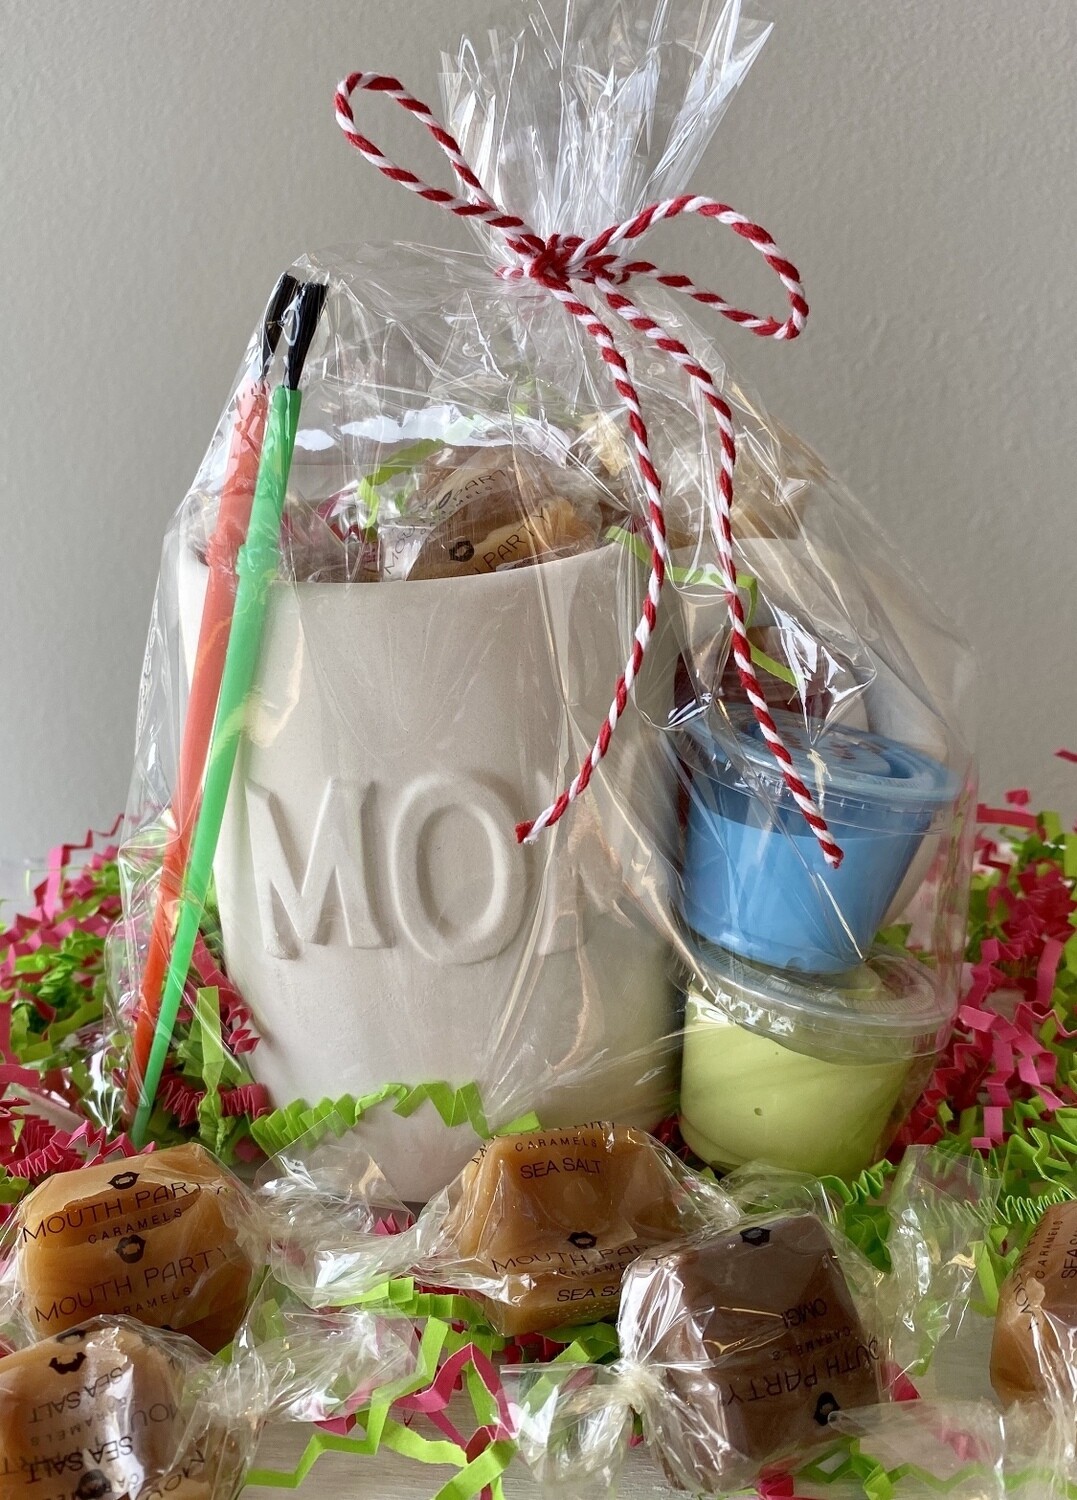 Take Home Mother's Day Gift! Mom Mug with Mouth Party Caramels and Glazes - Pick up at Pet Depot